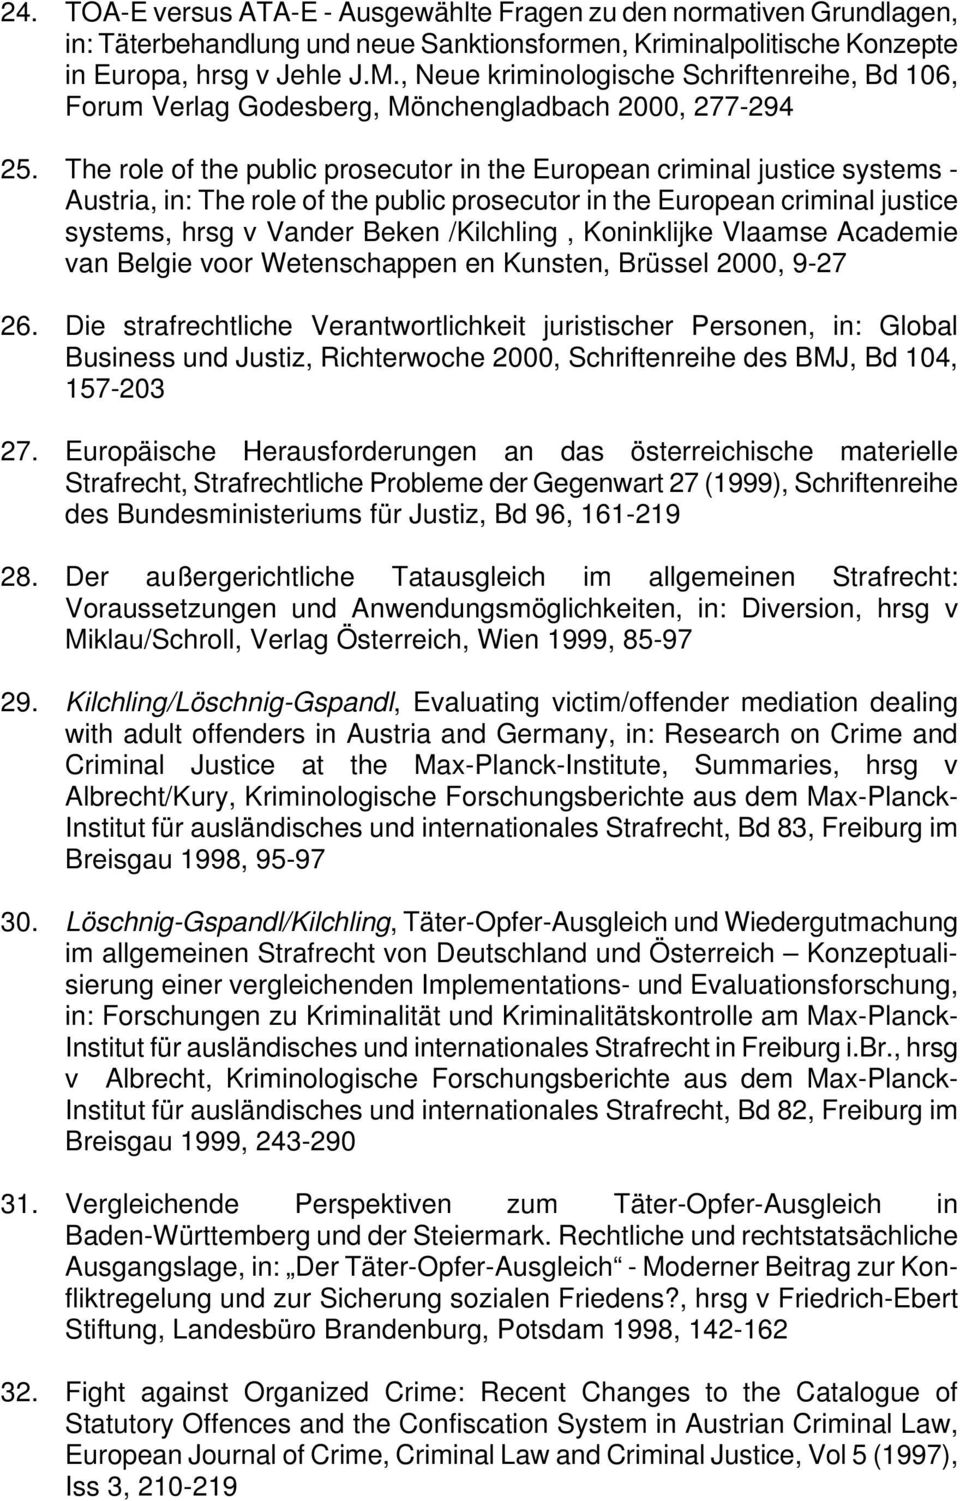 The role of the public prosecutor in the European criminal justice systems - Austria, in: The role of the public prosecutor in the European criminal justice systems, hrsg v Vander Beken /Kilchling,